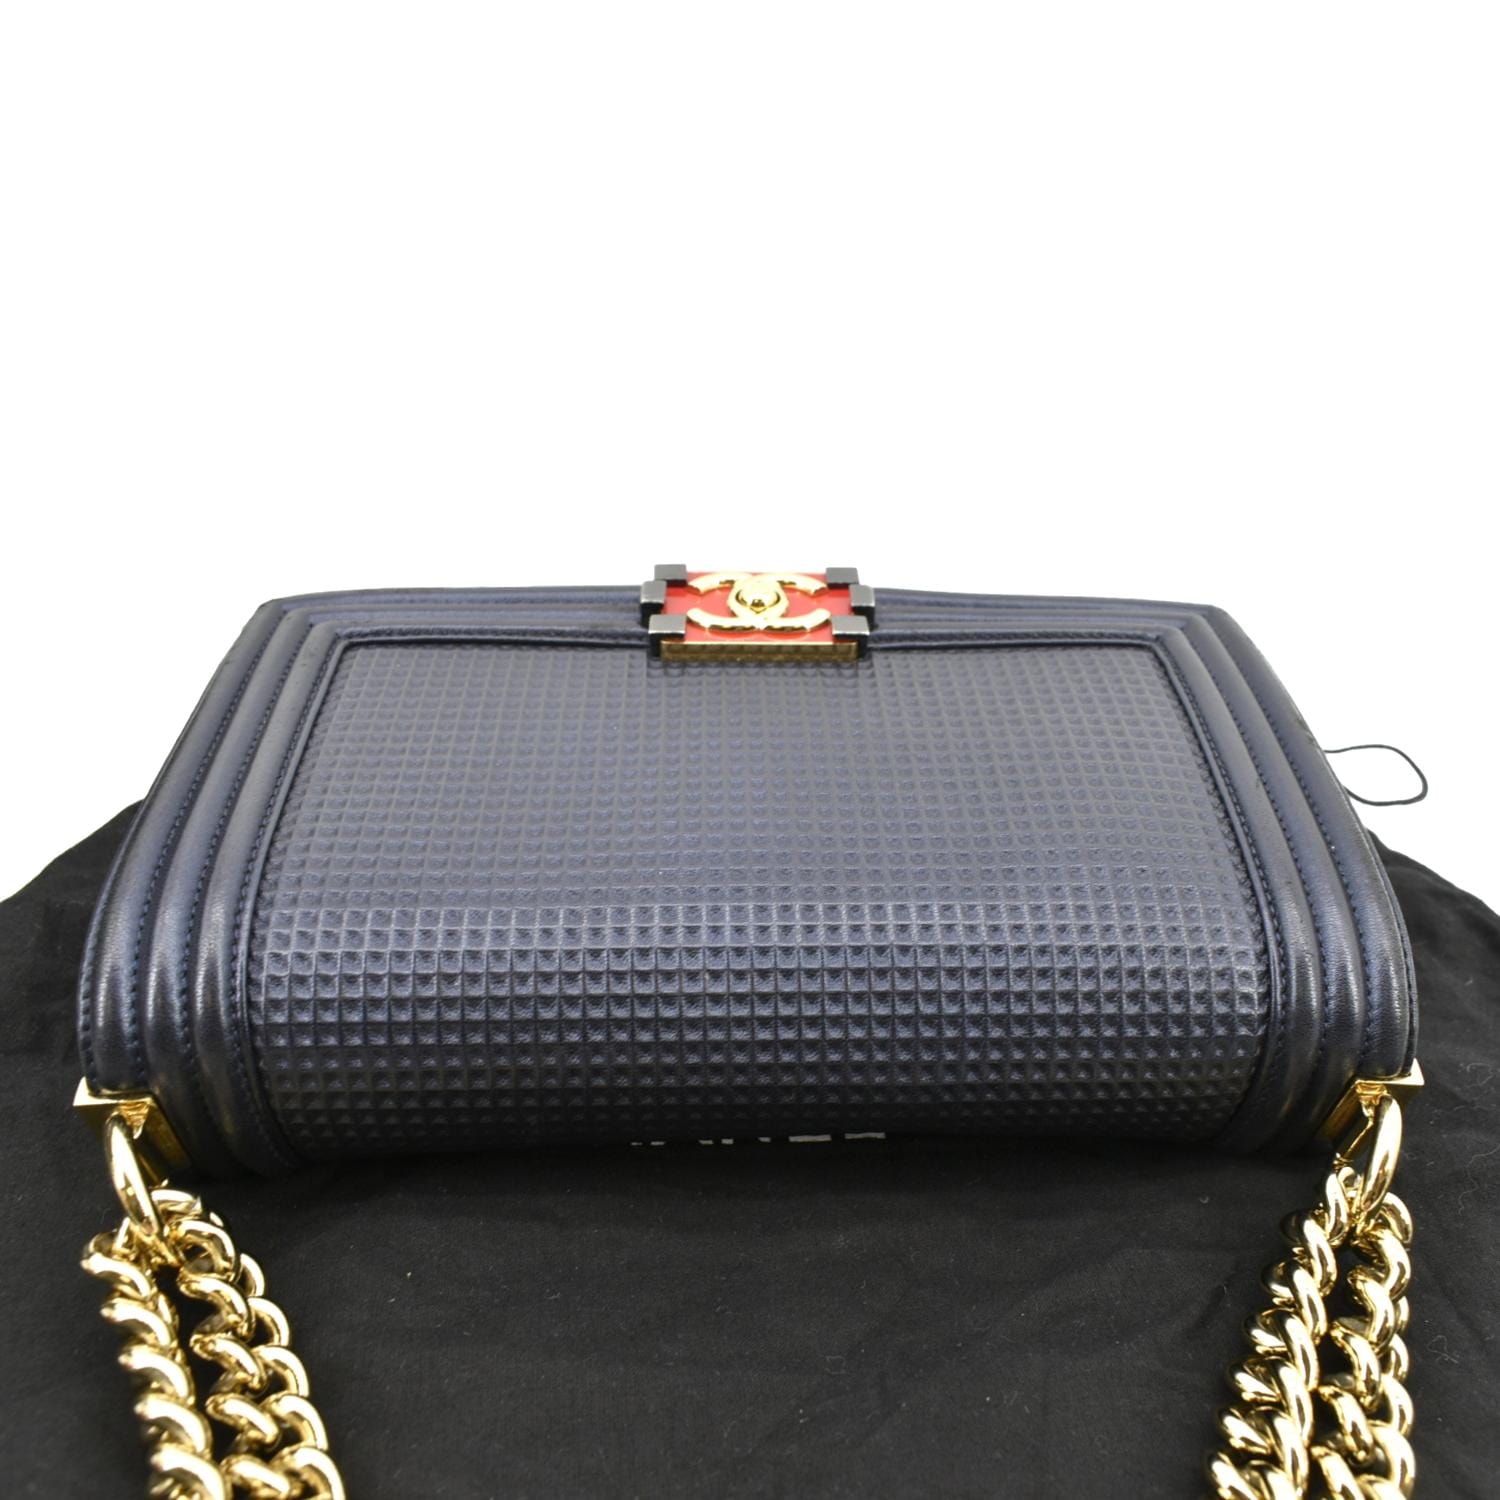 Chanel Vintage Gold Metallic Quilted Leather Frame Mini Clutch Bag